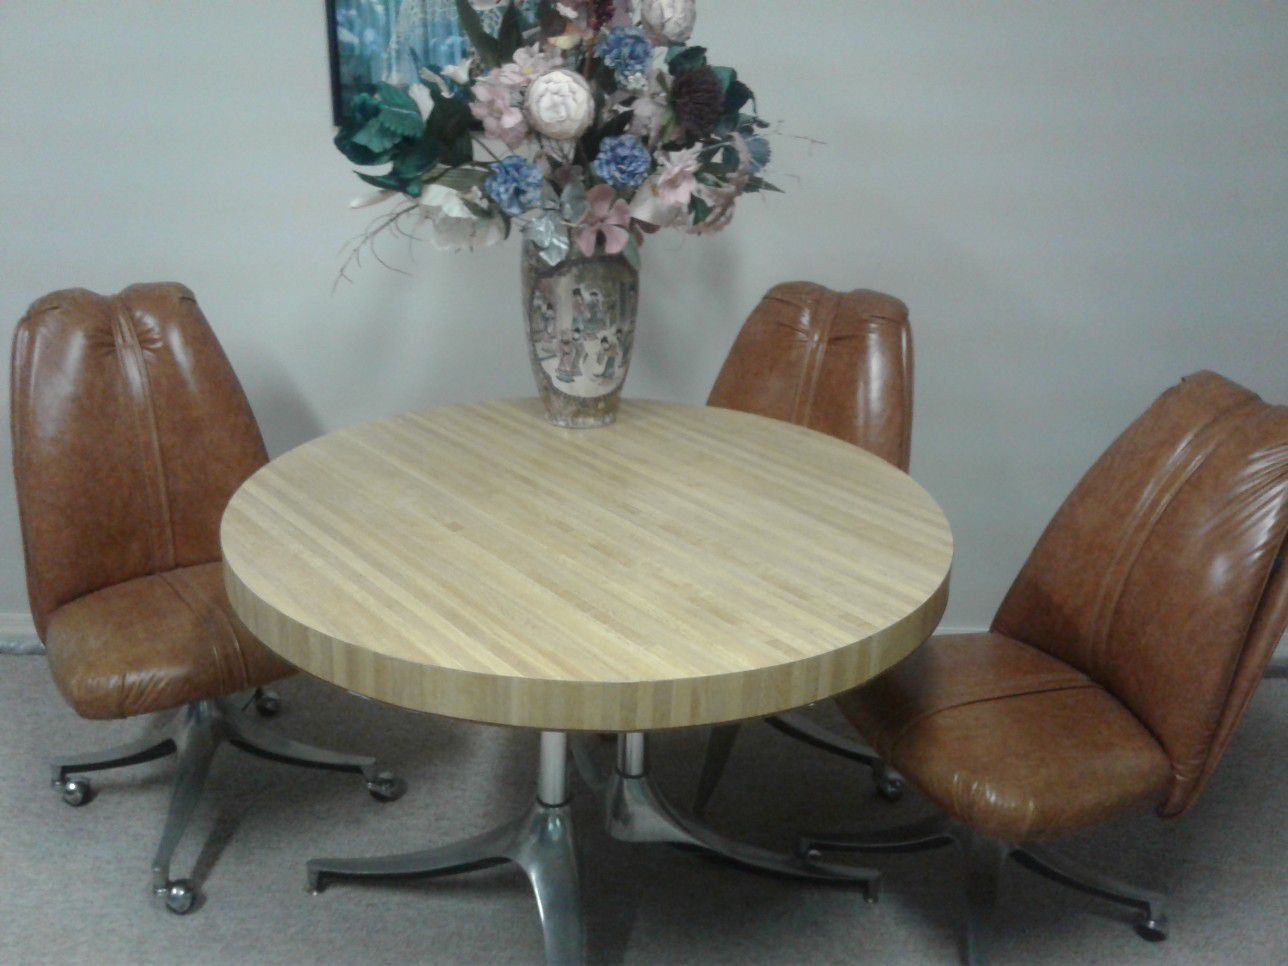 Dinette table with 3 free chairs